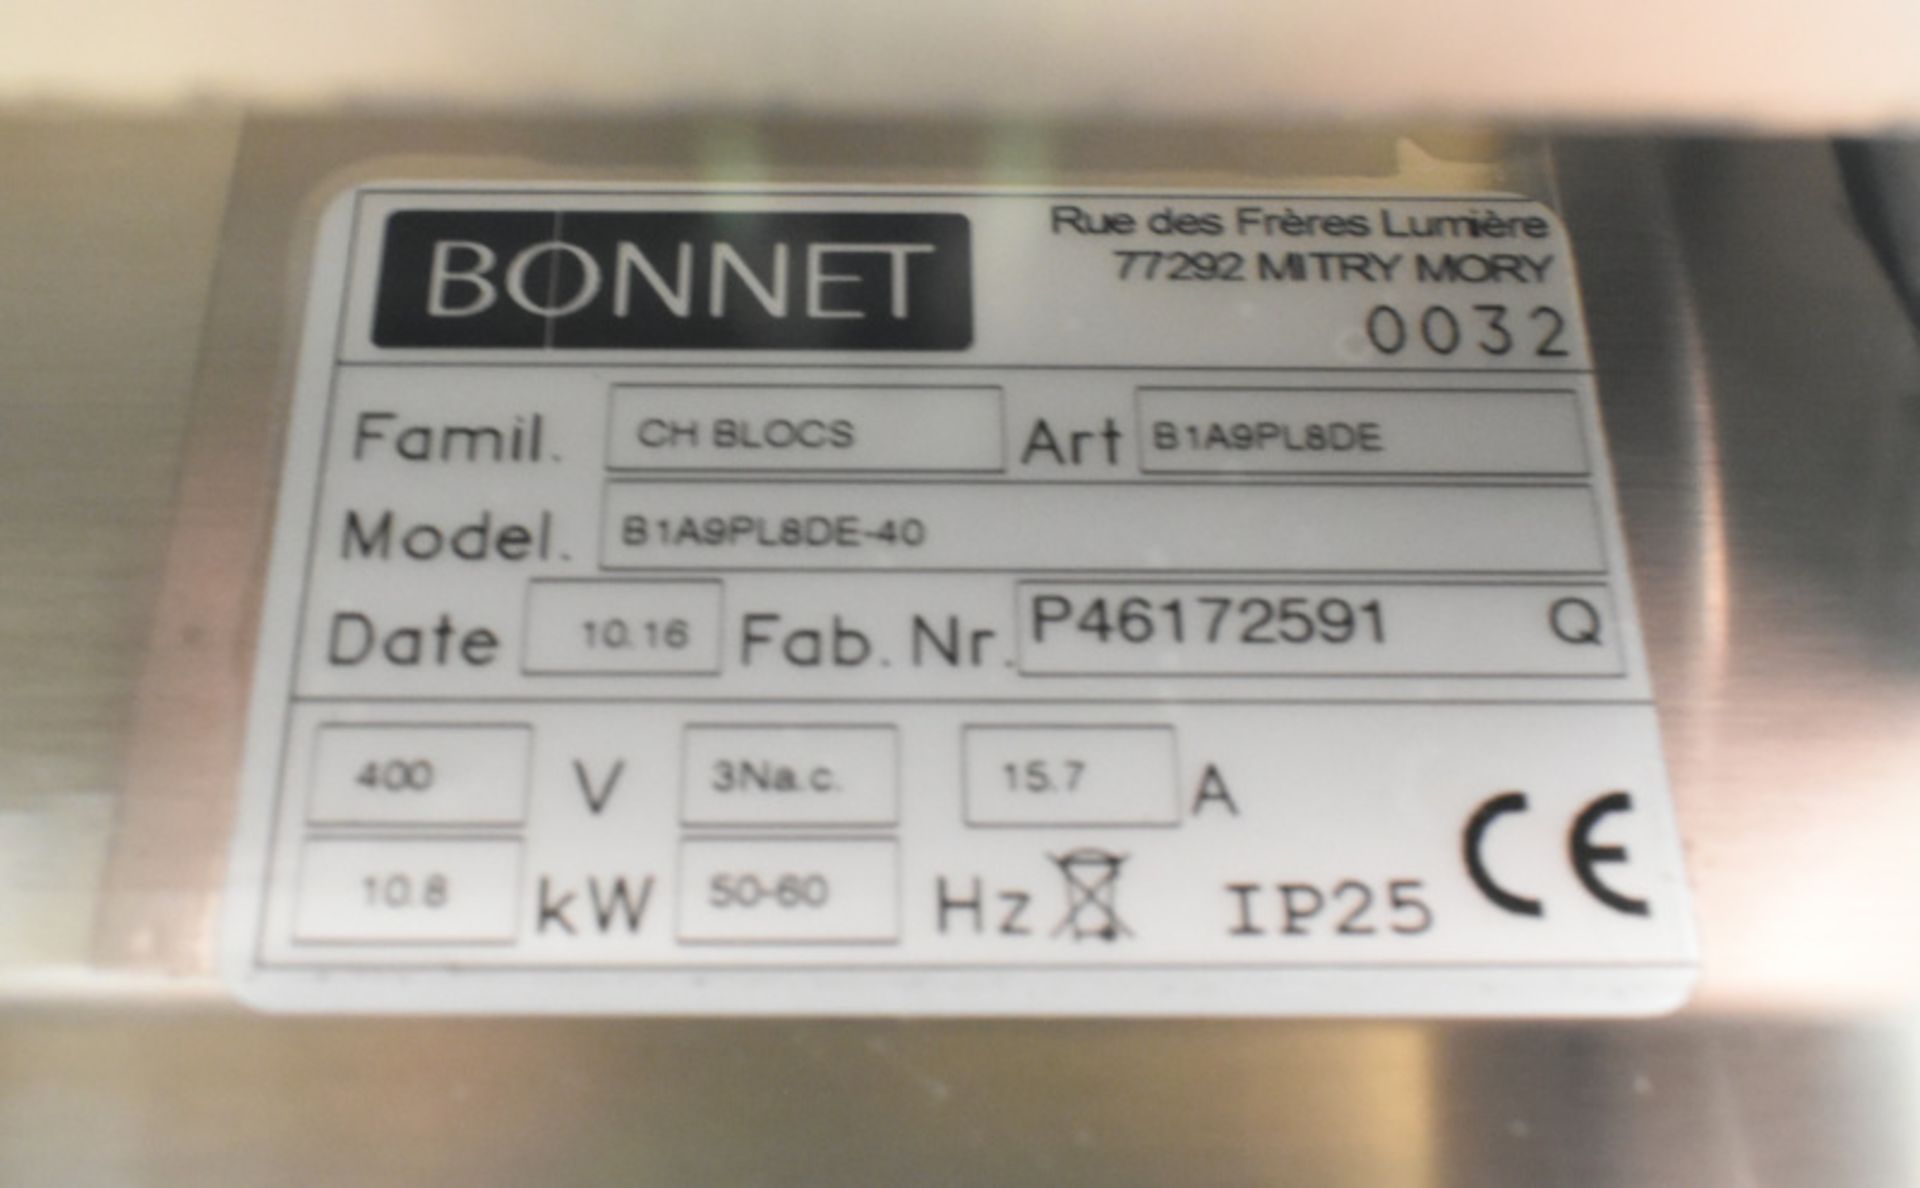 Bonnet ADV900 Top and Ranges Electric Griddle - Image 6 of 7